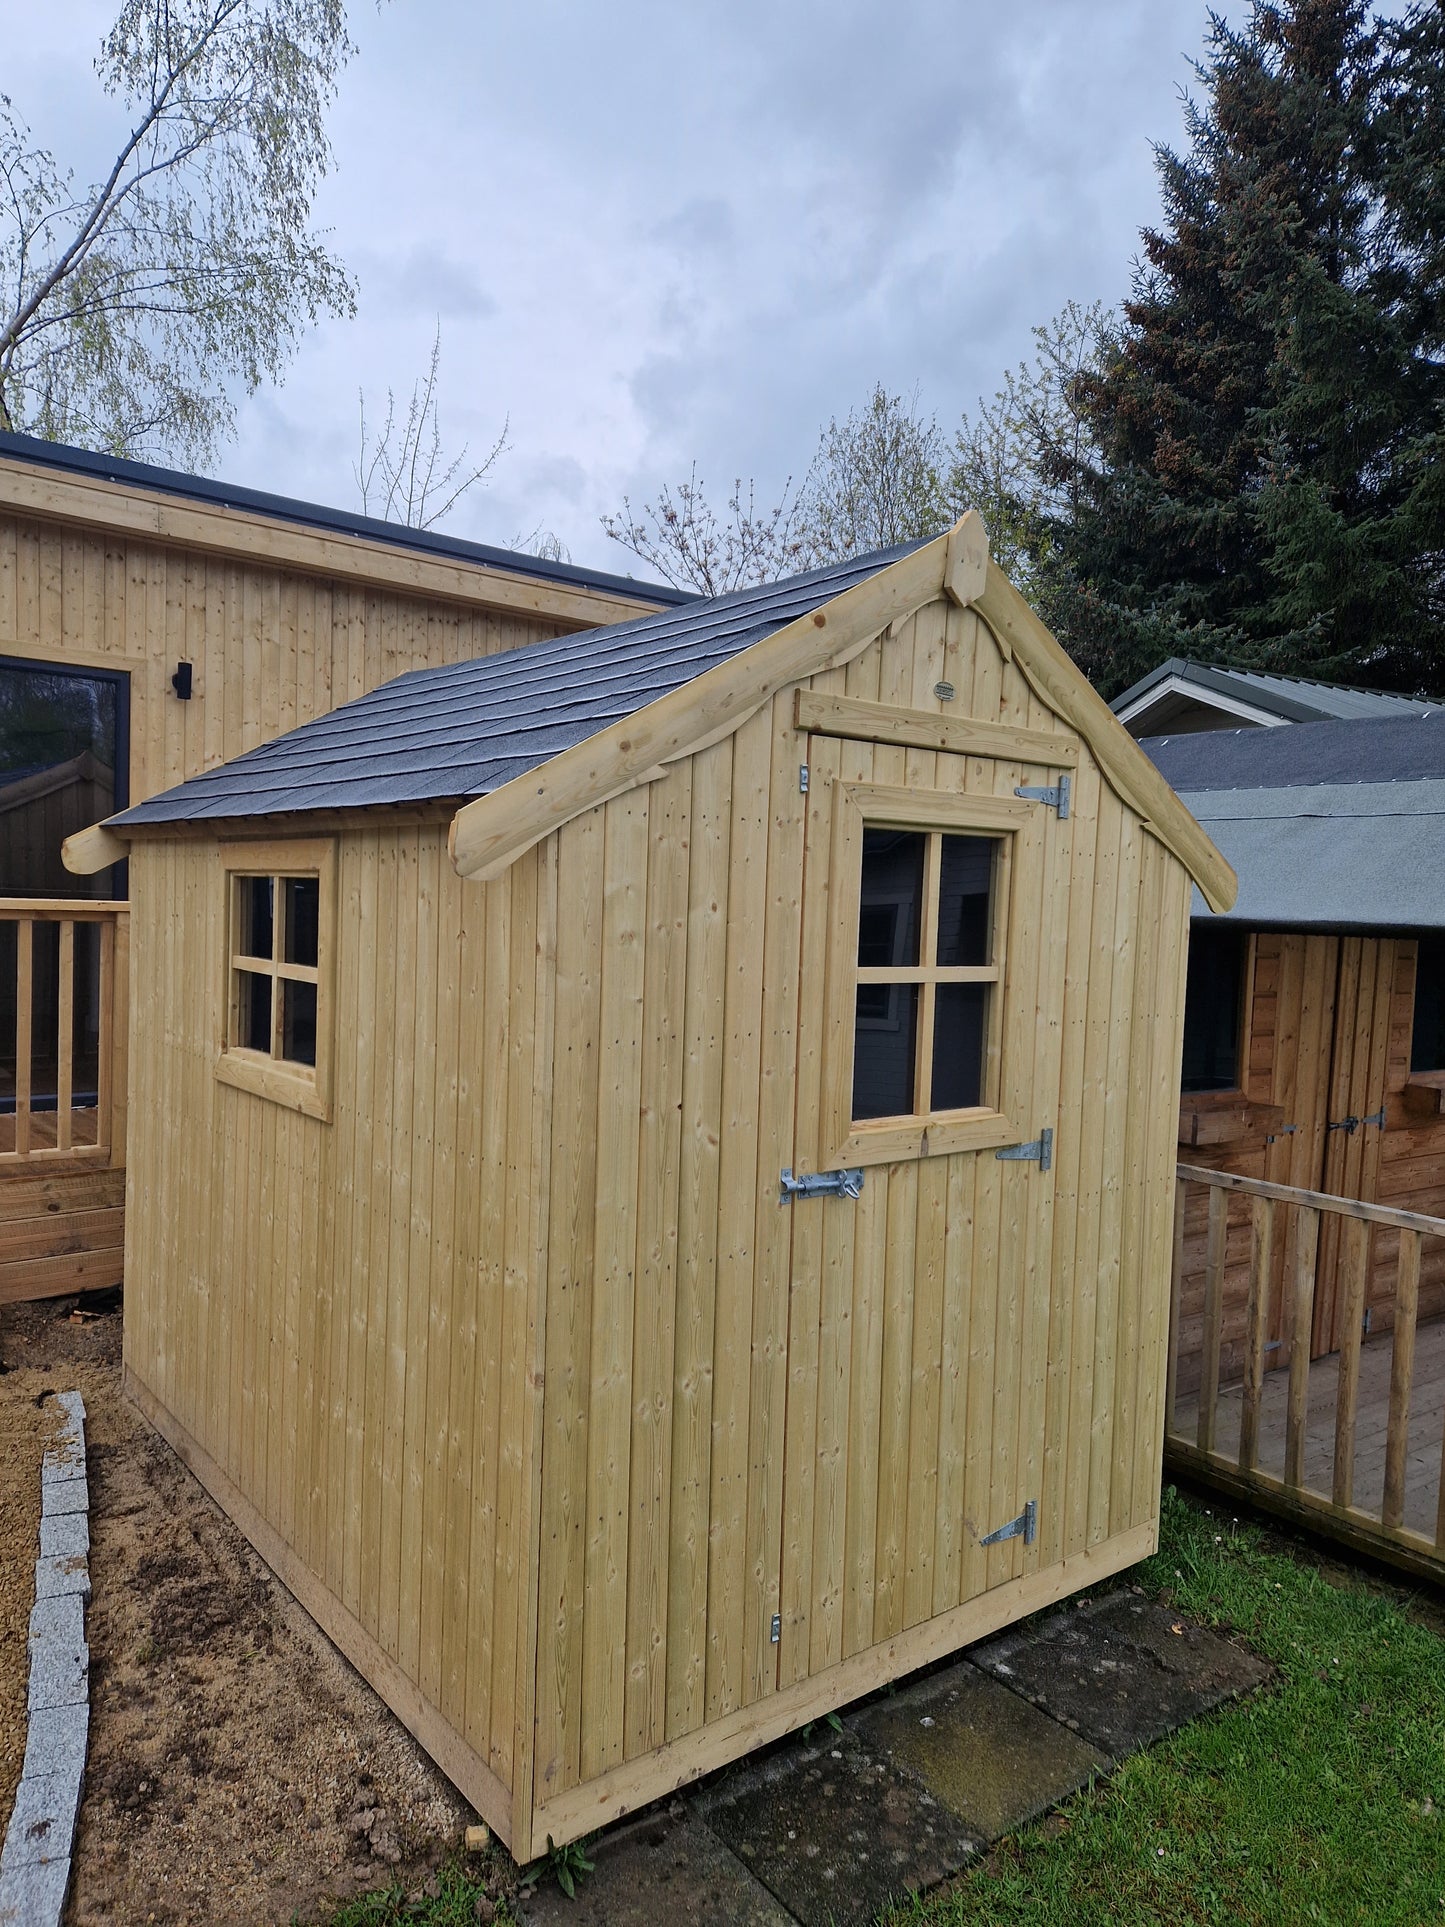 The 8 x 6 Vartry Garden Shed